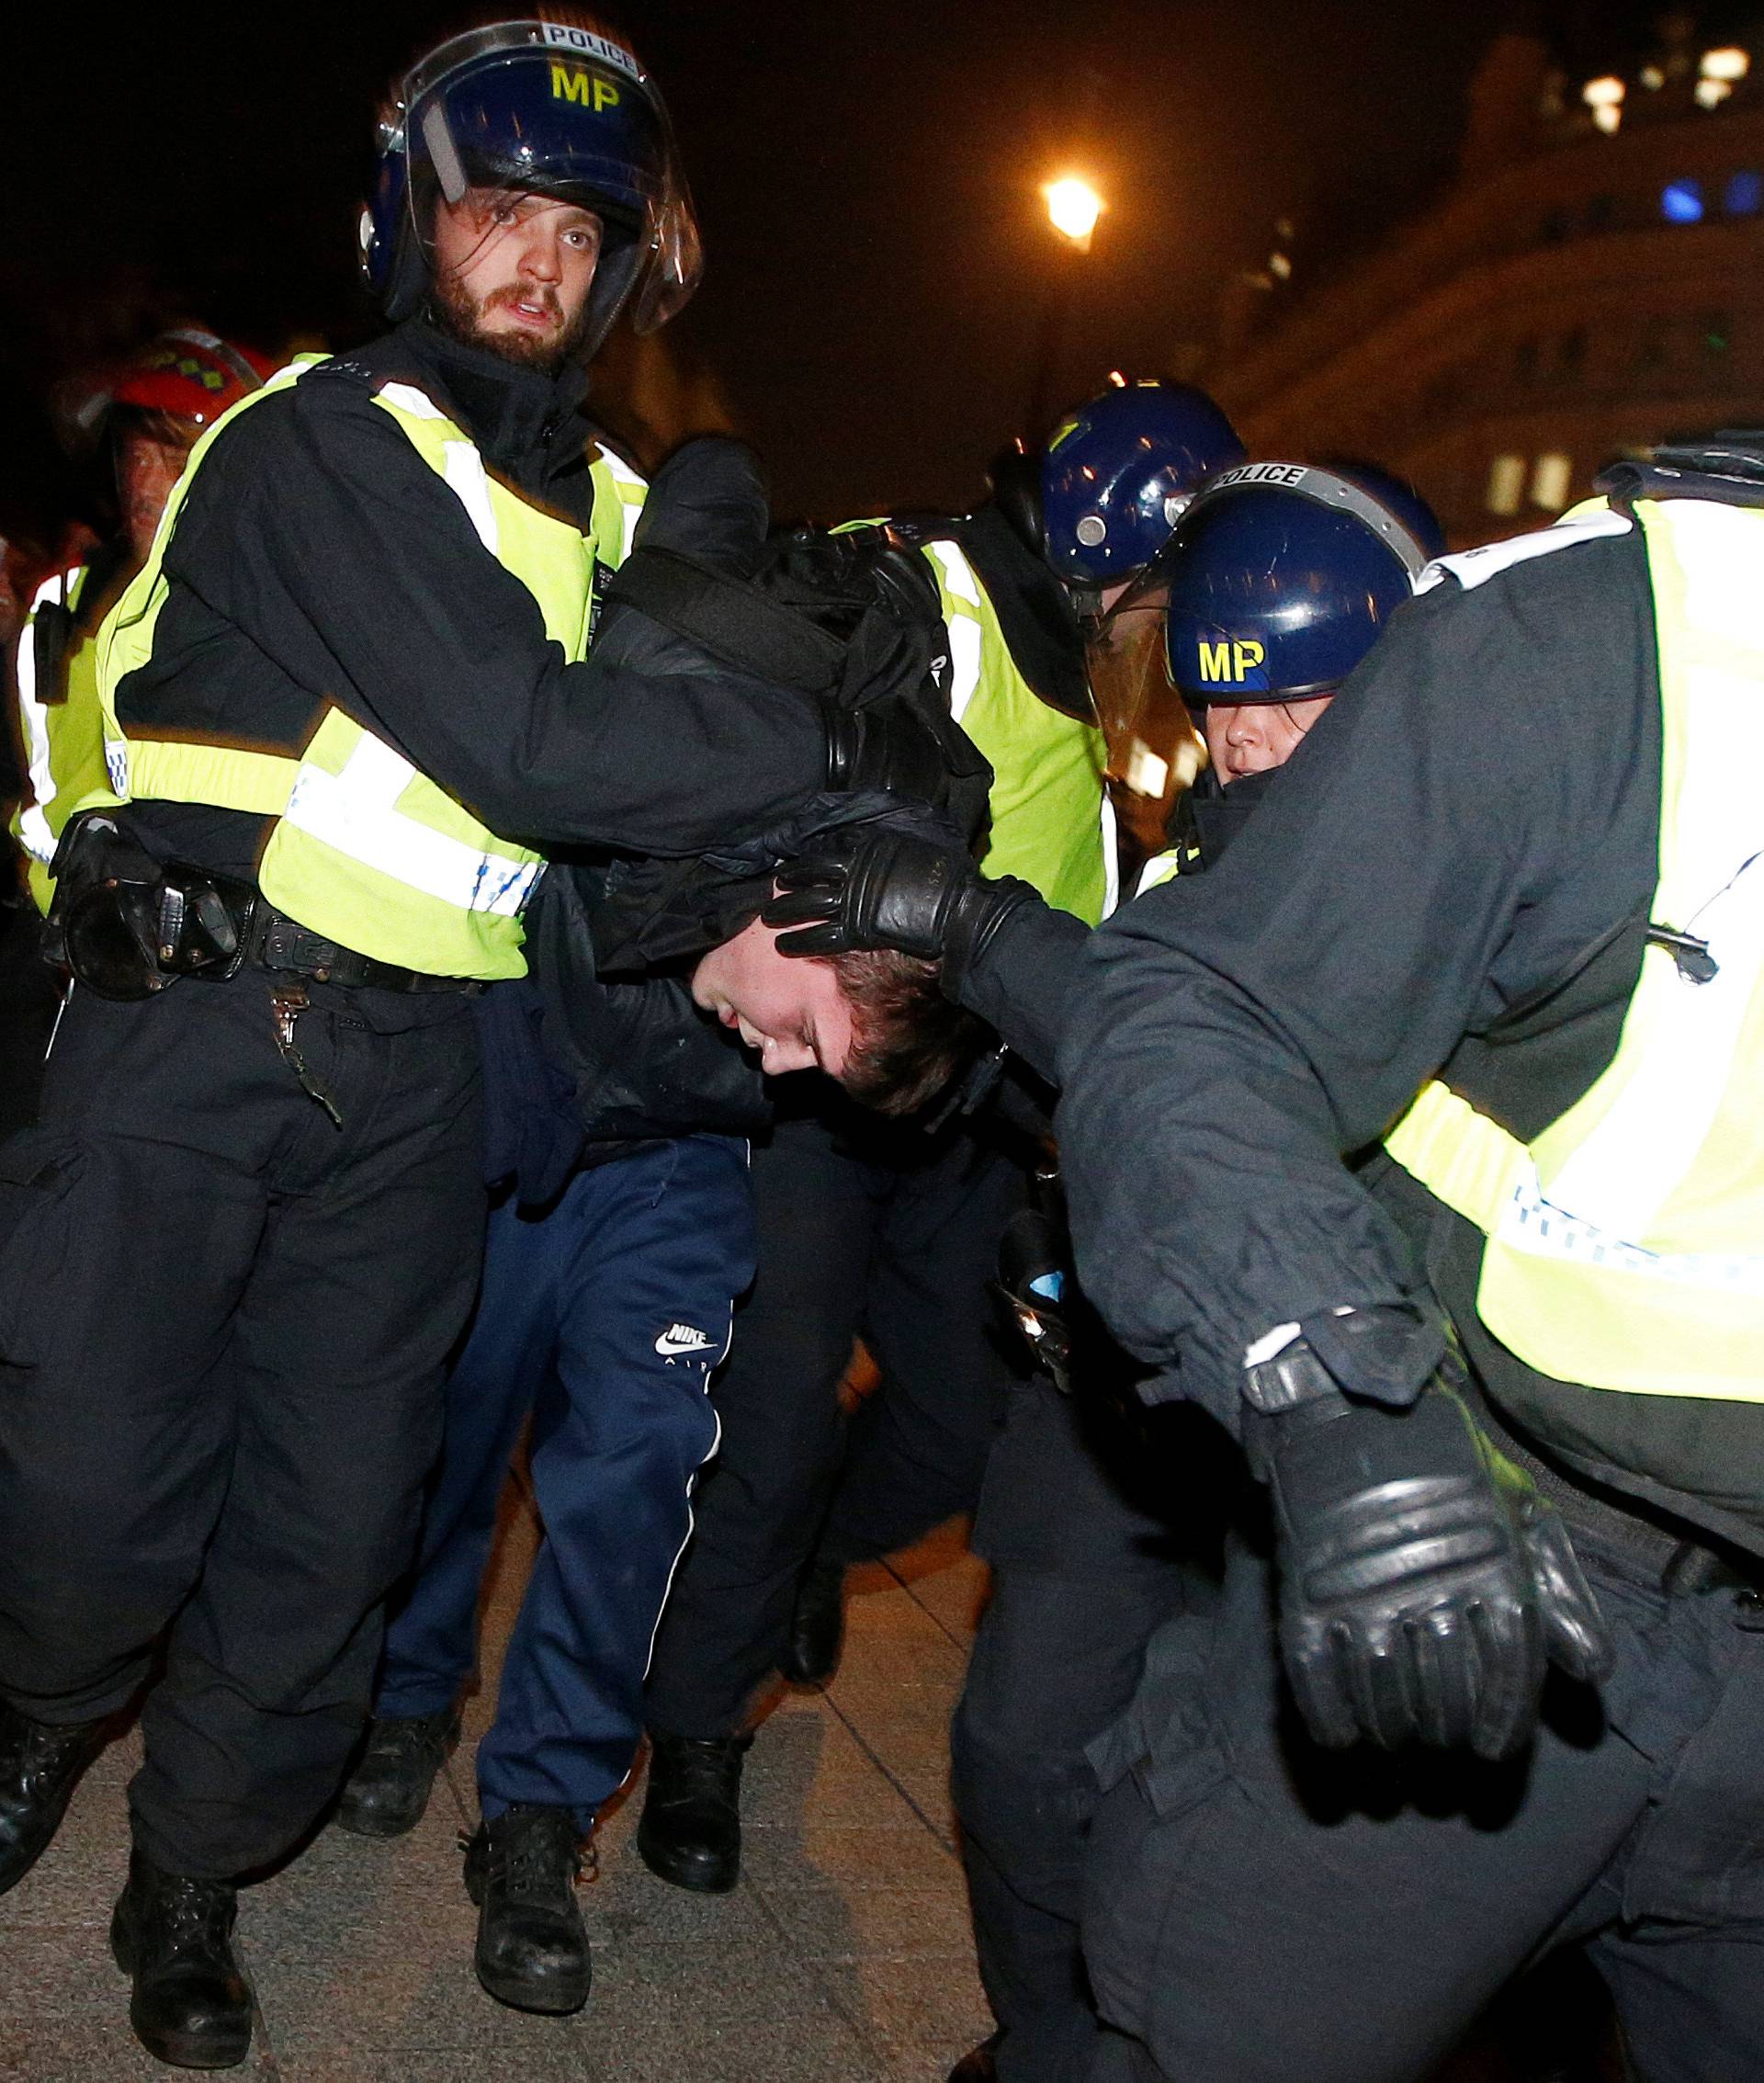 Police officers apprehend a protester during the "Million Mask March" in London